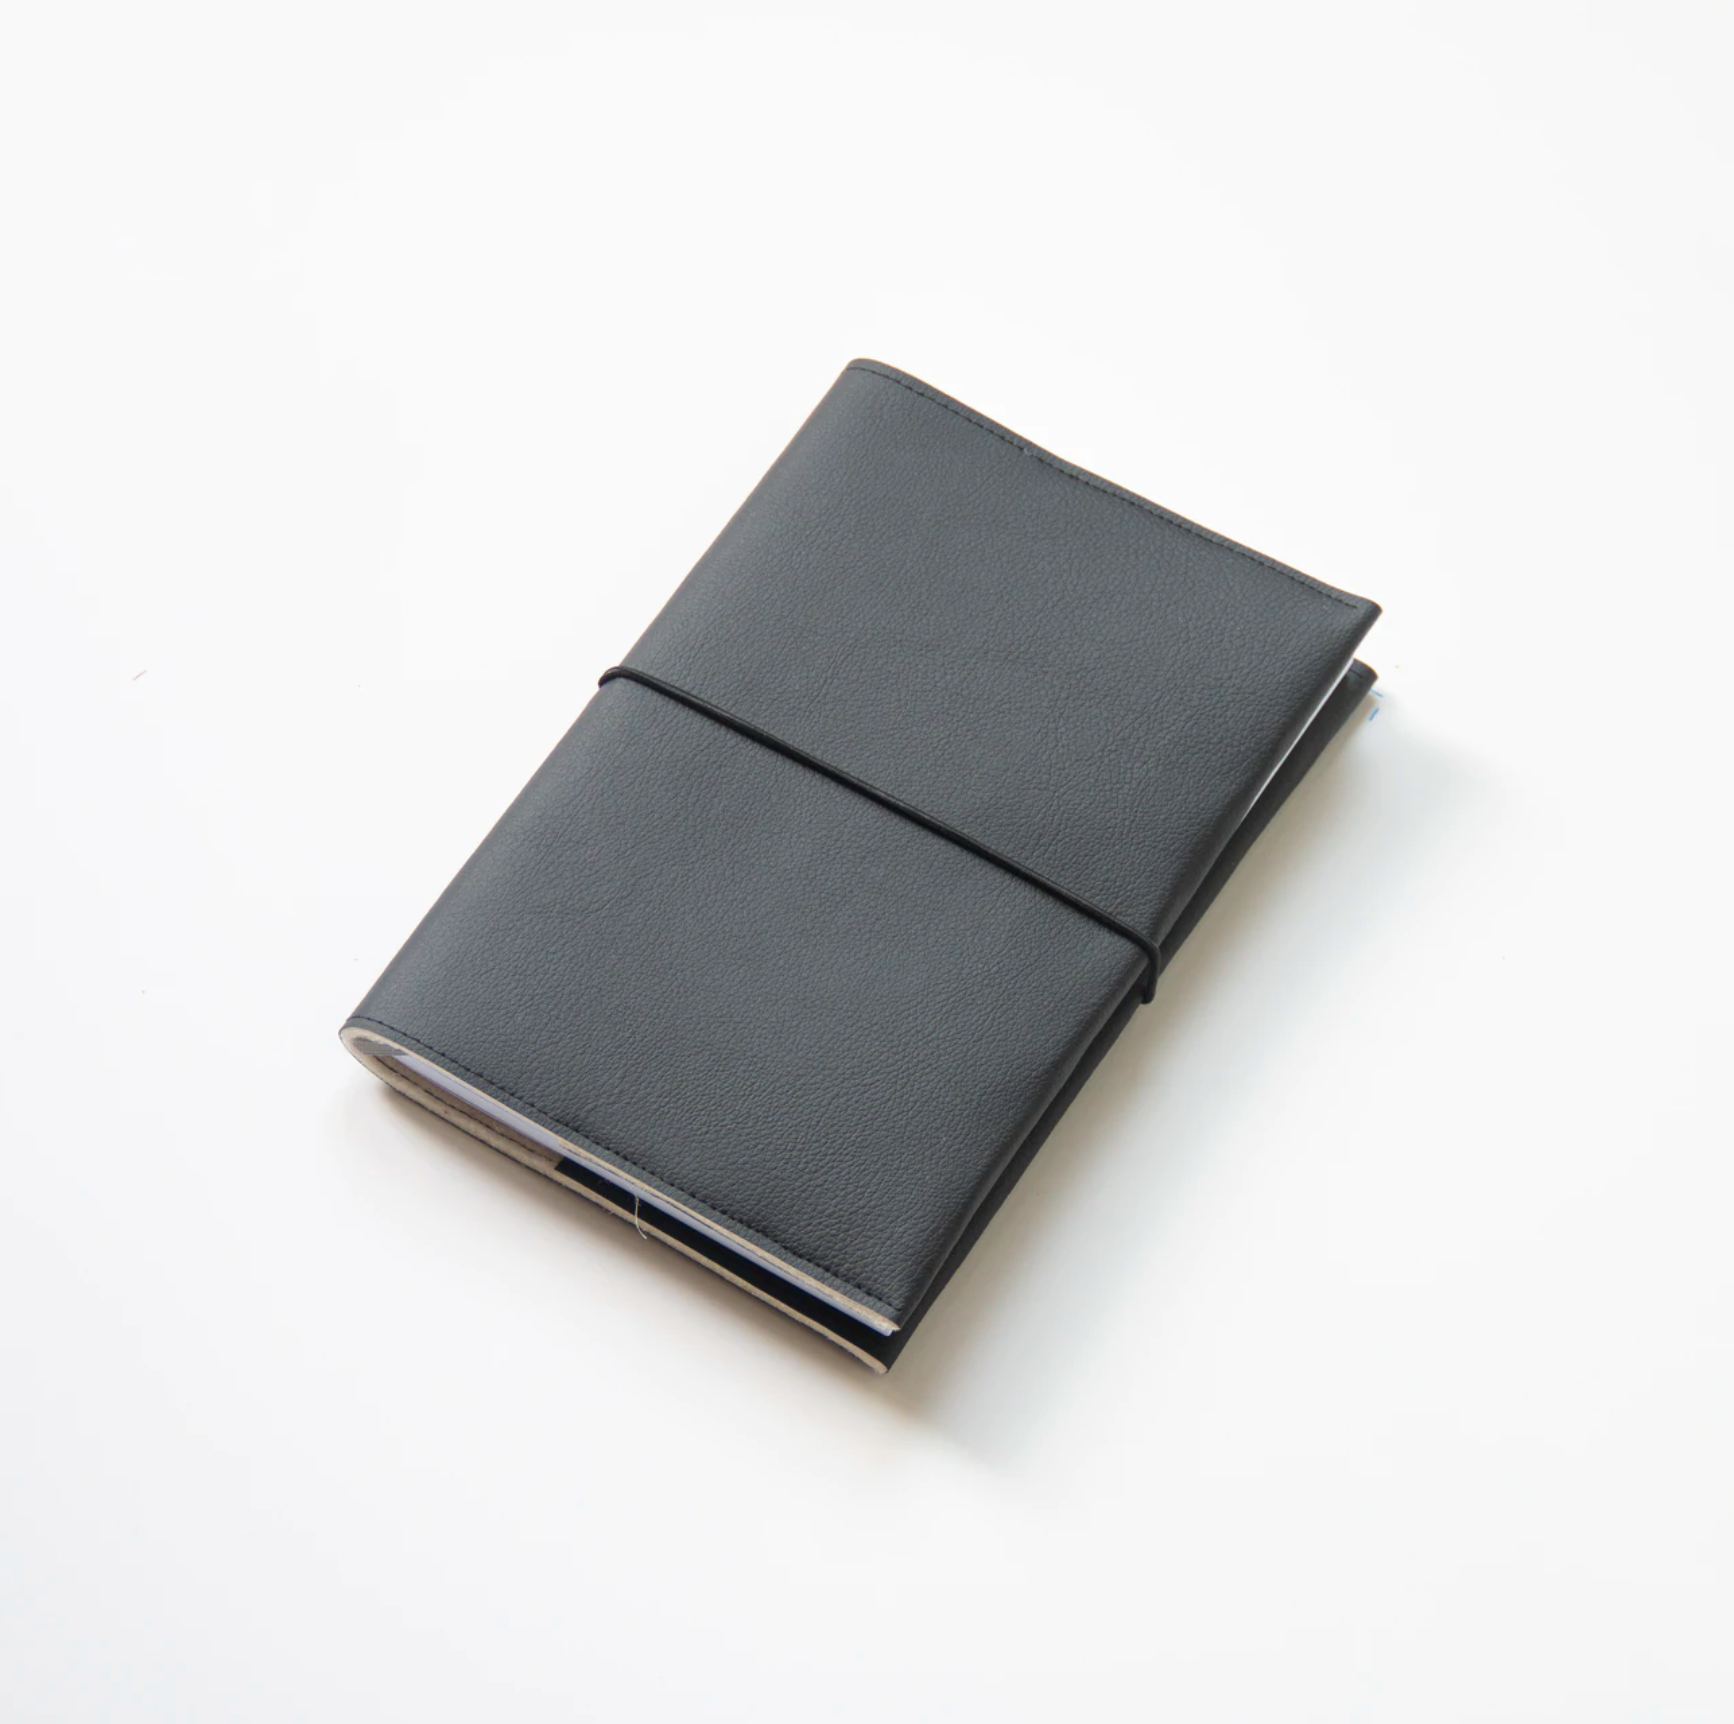 OCTÀGON DESIGN | 2023/2024 PRO Weekly Planner | Vegan leather cover